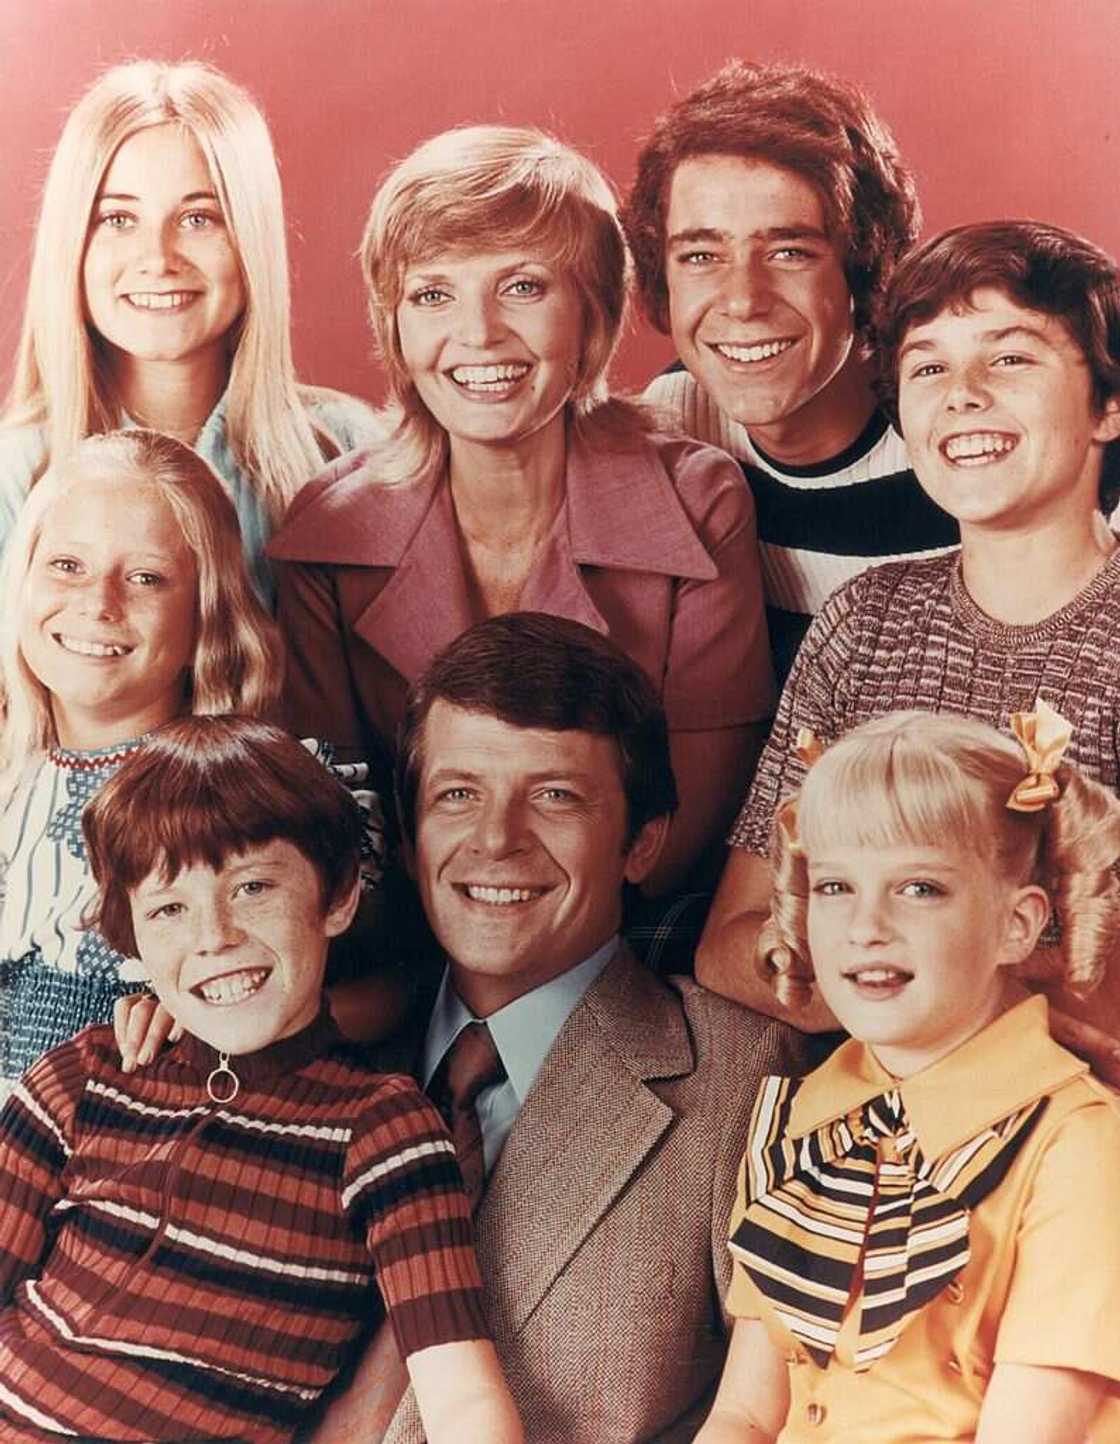 How old is Eve Plumb from The Brady Bunch